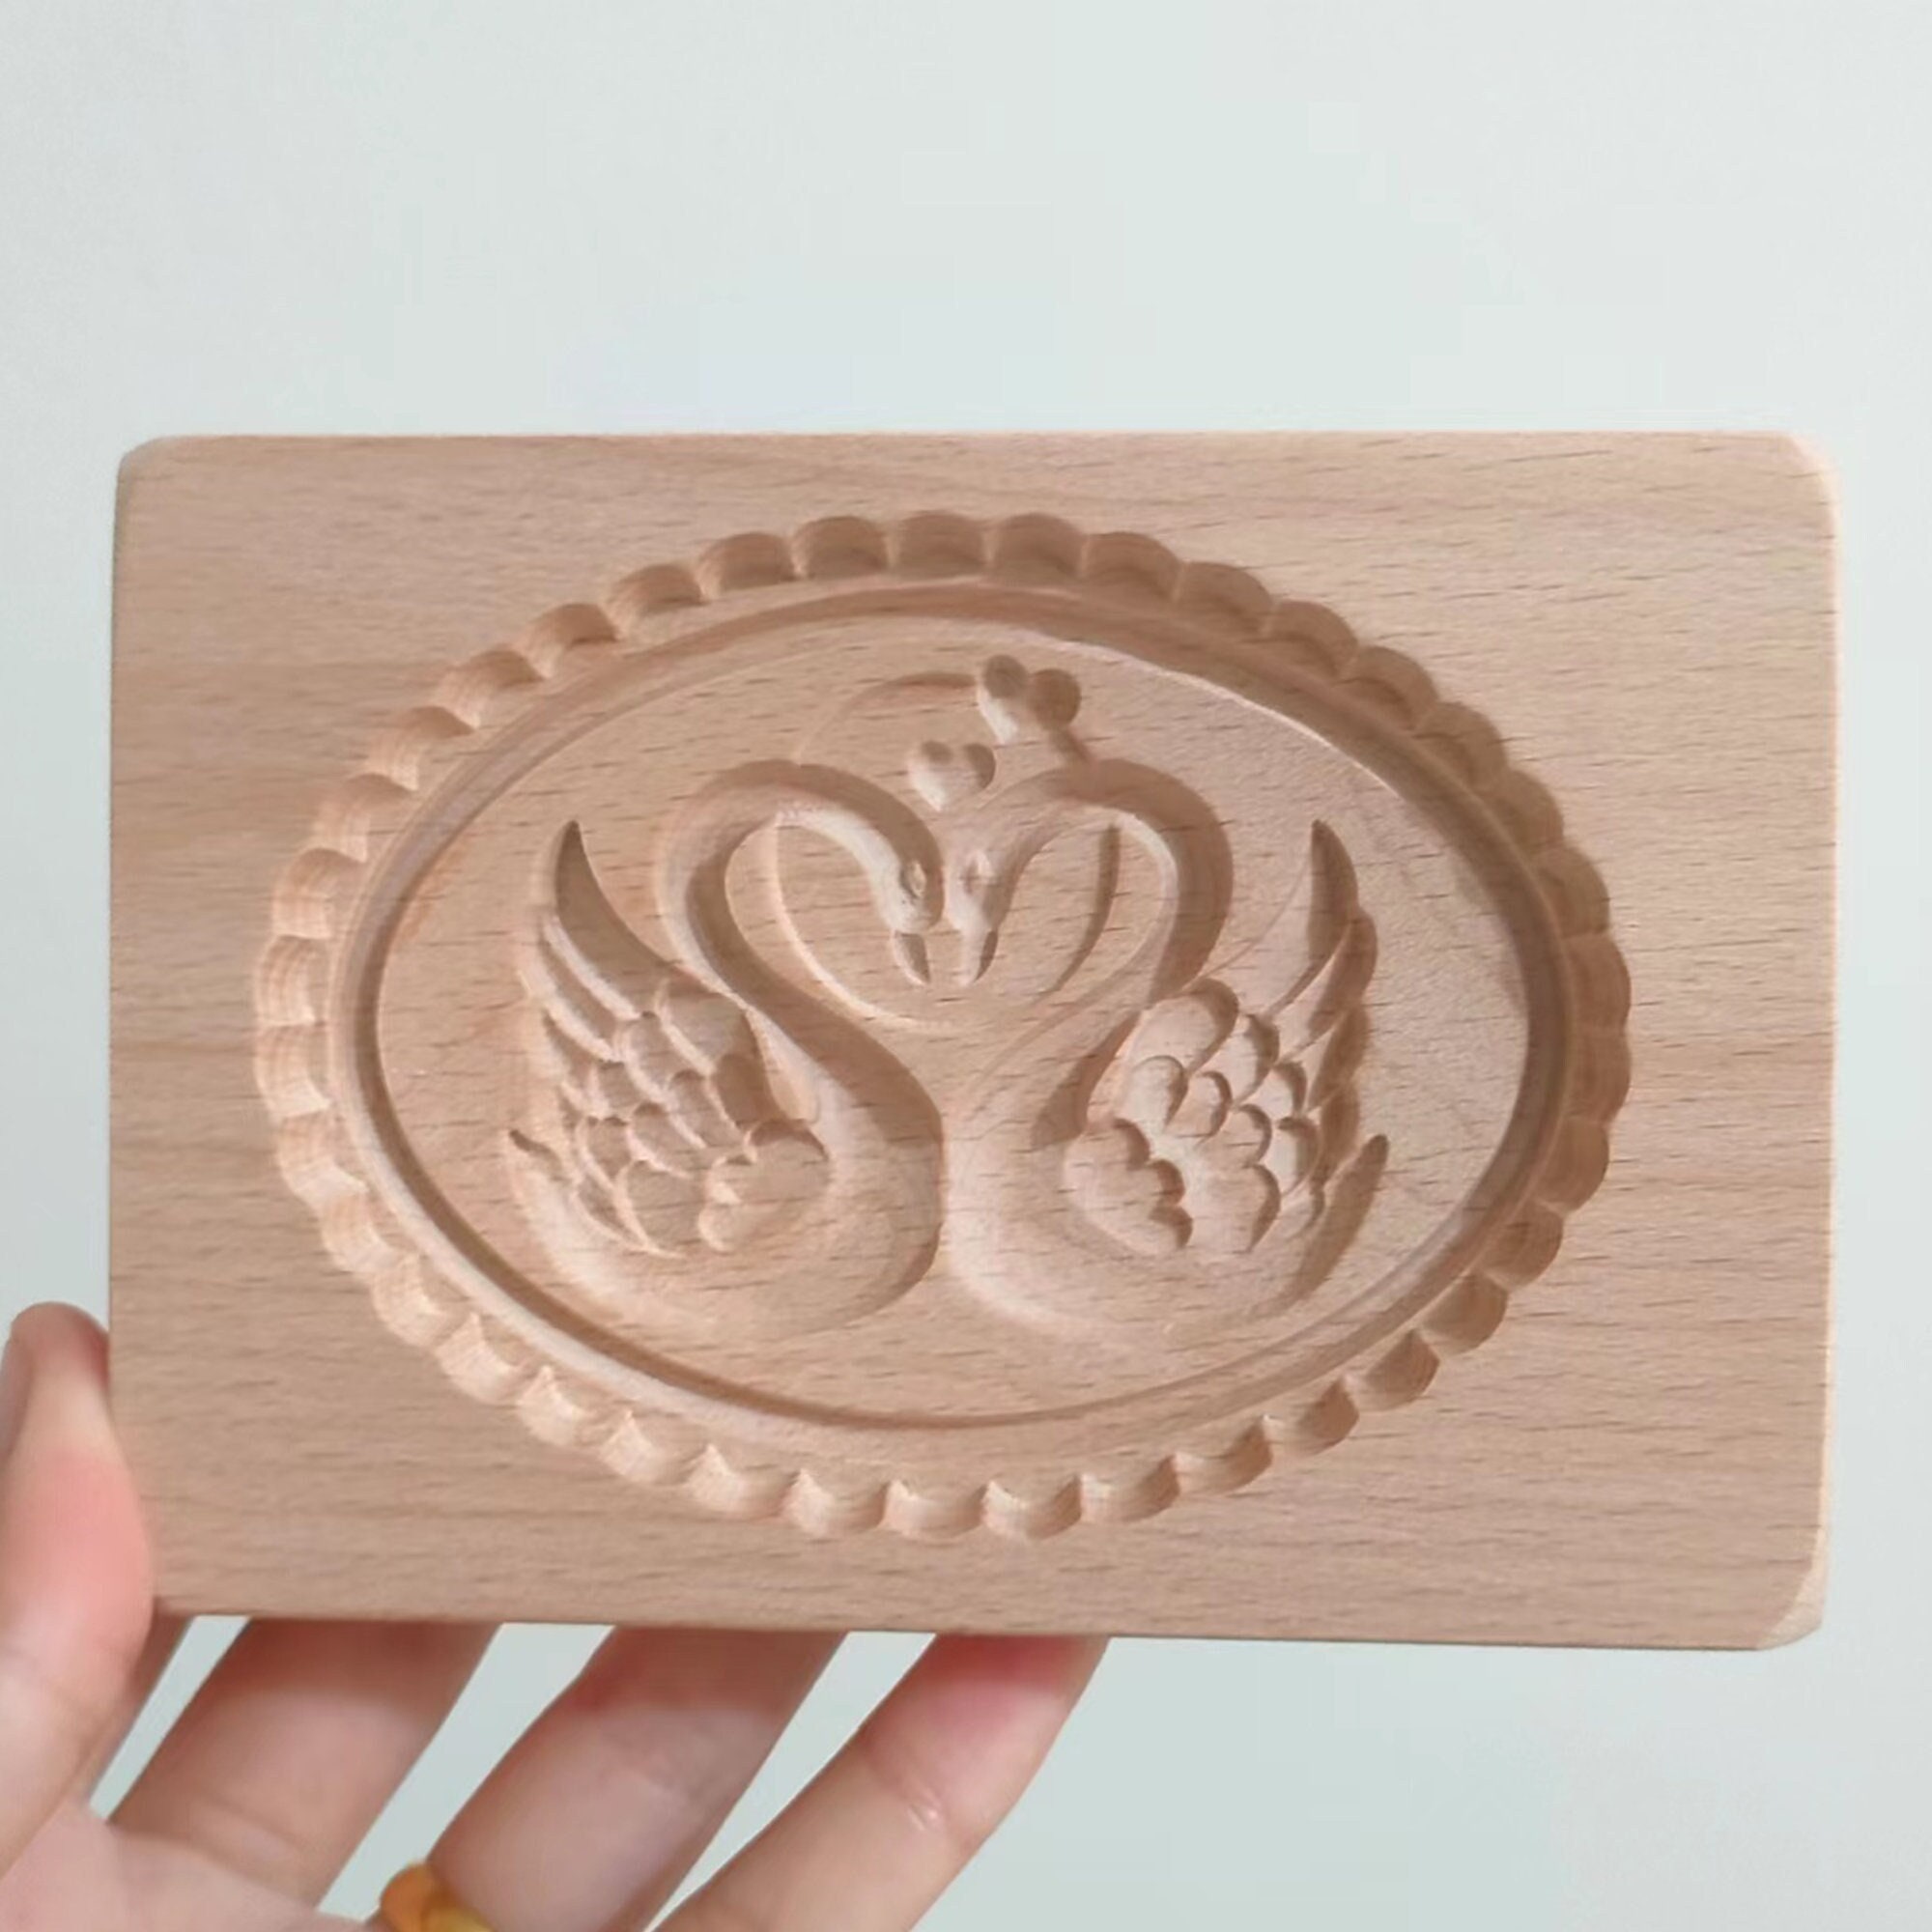 Scottish Shortbread 6 3/4 Mould. Traditional Wood Thistle Cookie Mold Hand  Carved in Braemar Scotland by J & I Crichton. 